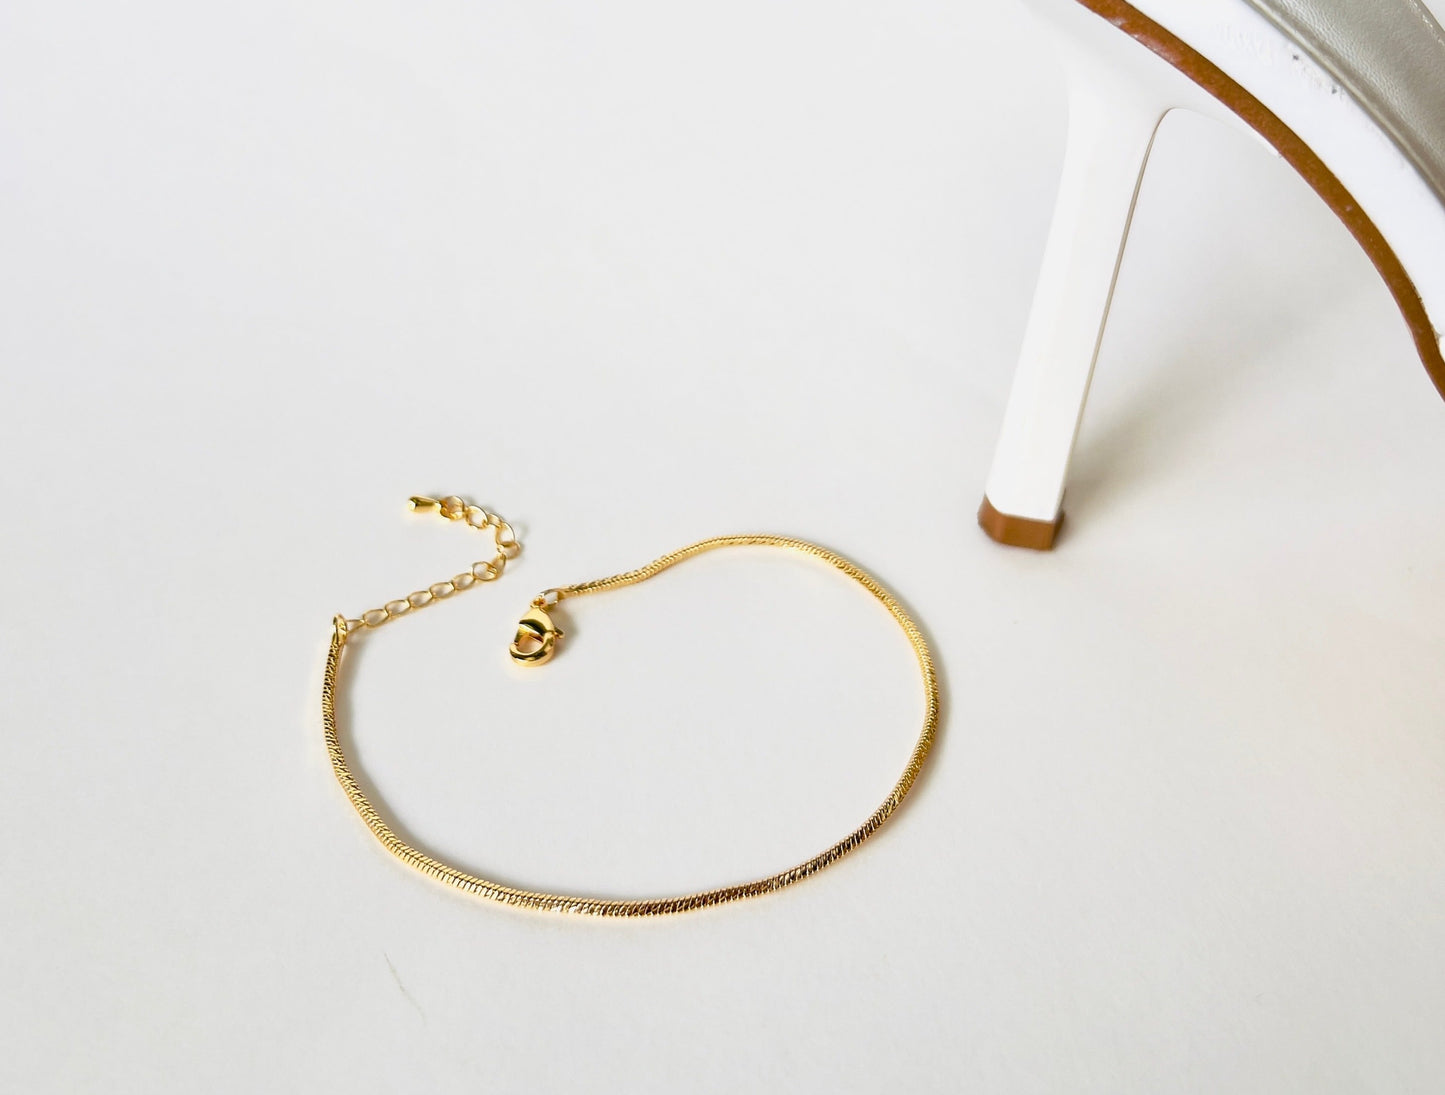 Sleek snake chain gold anklet with secure lobster clasp - Stylish and versatile ankle accessory